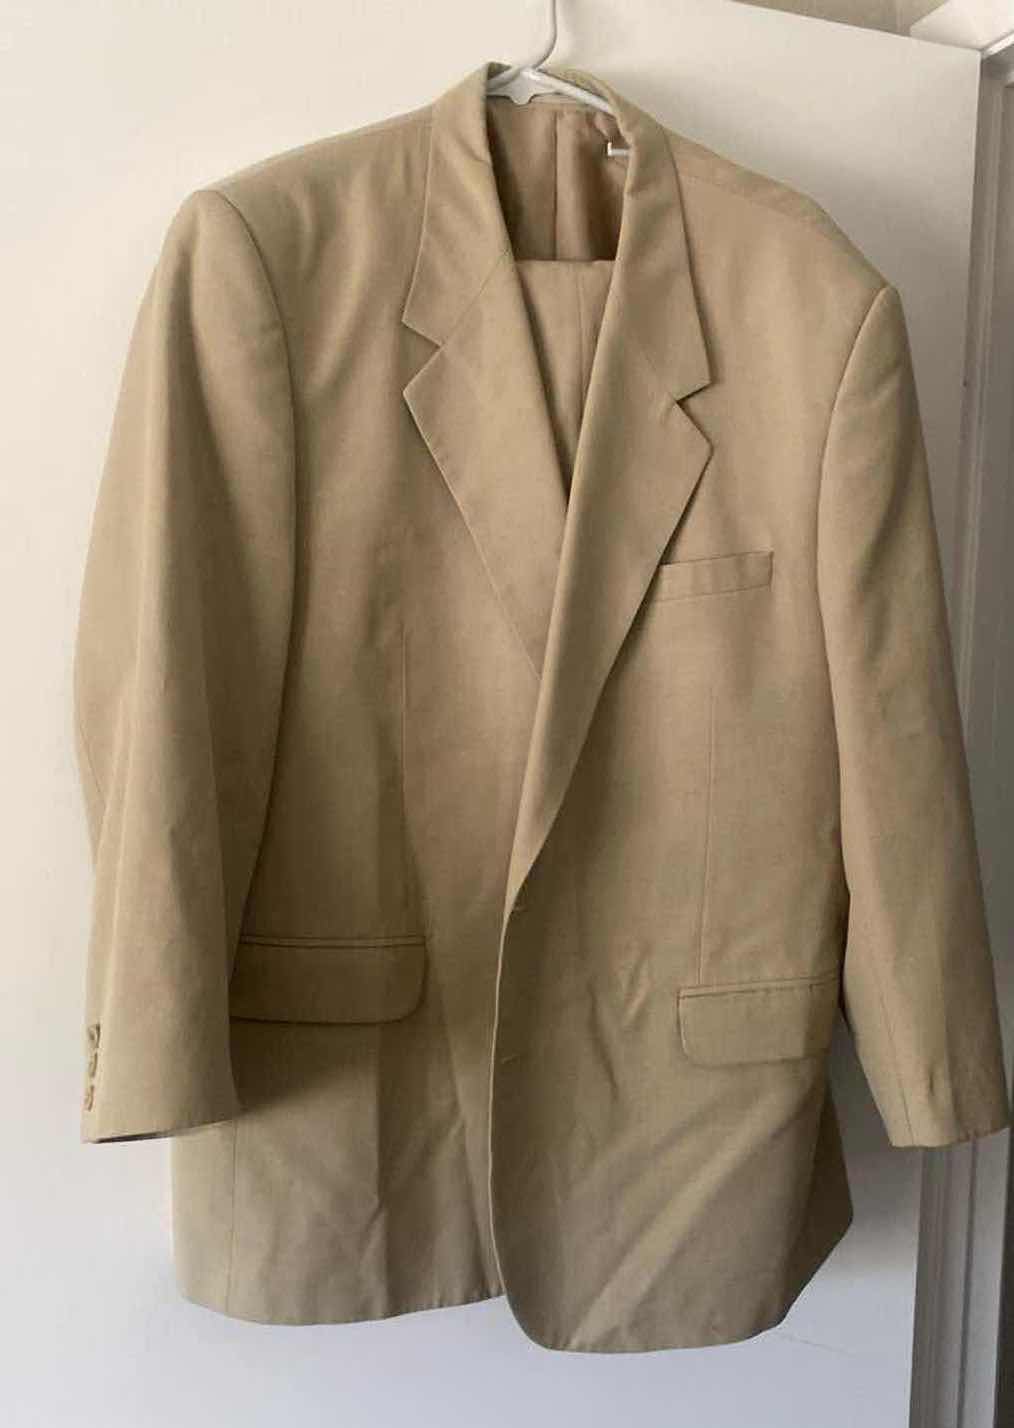 Photo 1 of MENS SIZE APPROX 40 FALABELLA SUIT FROM HARRIS & FRANK IN CHILE - PANTS MEASURE 40 x 27